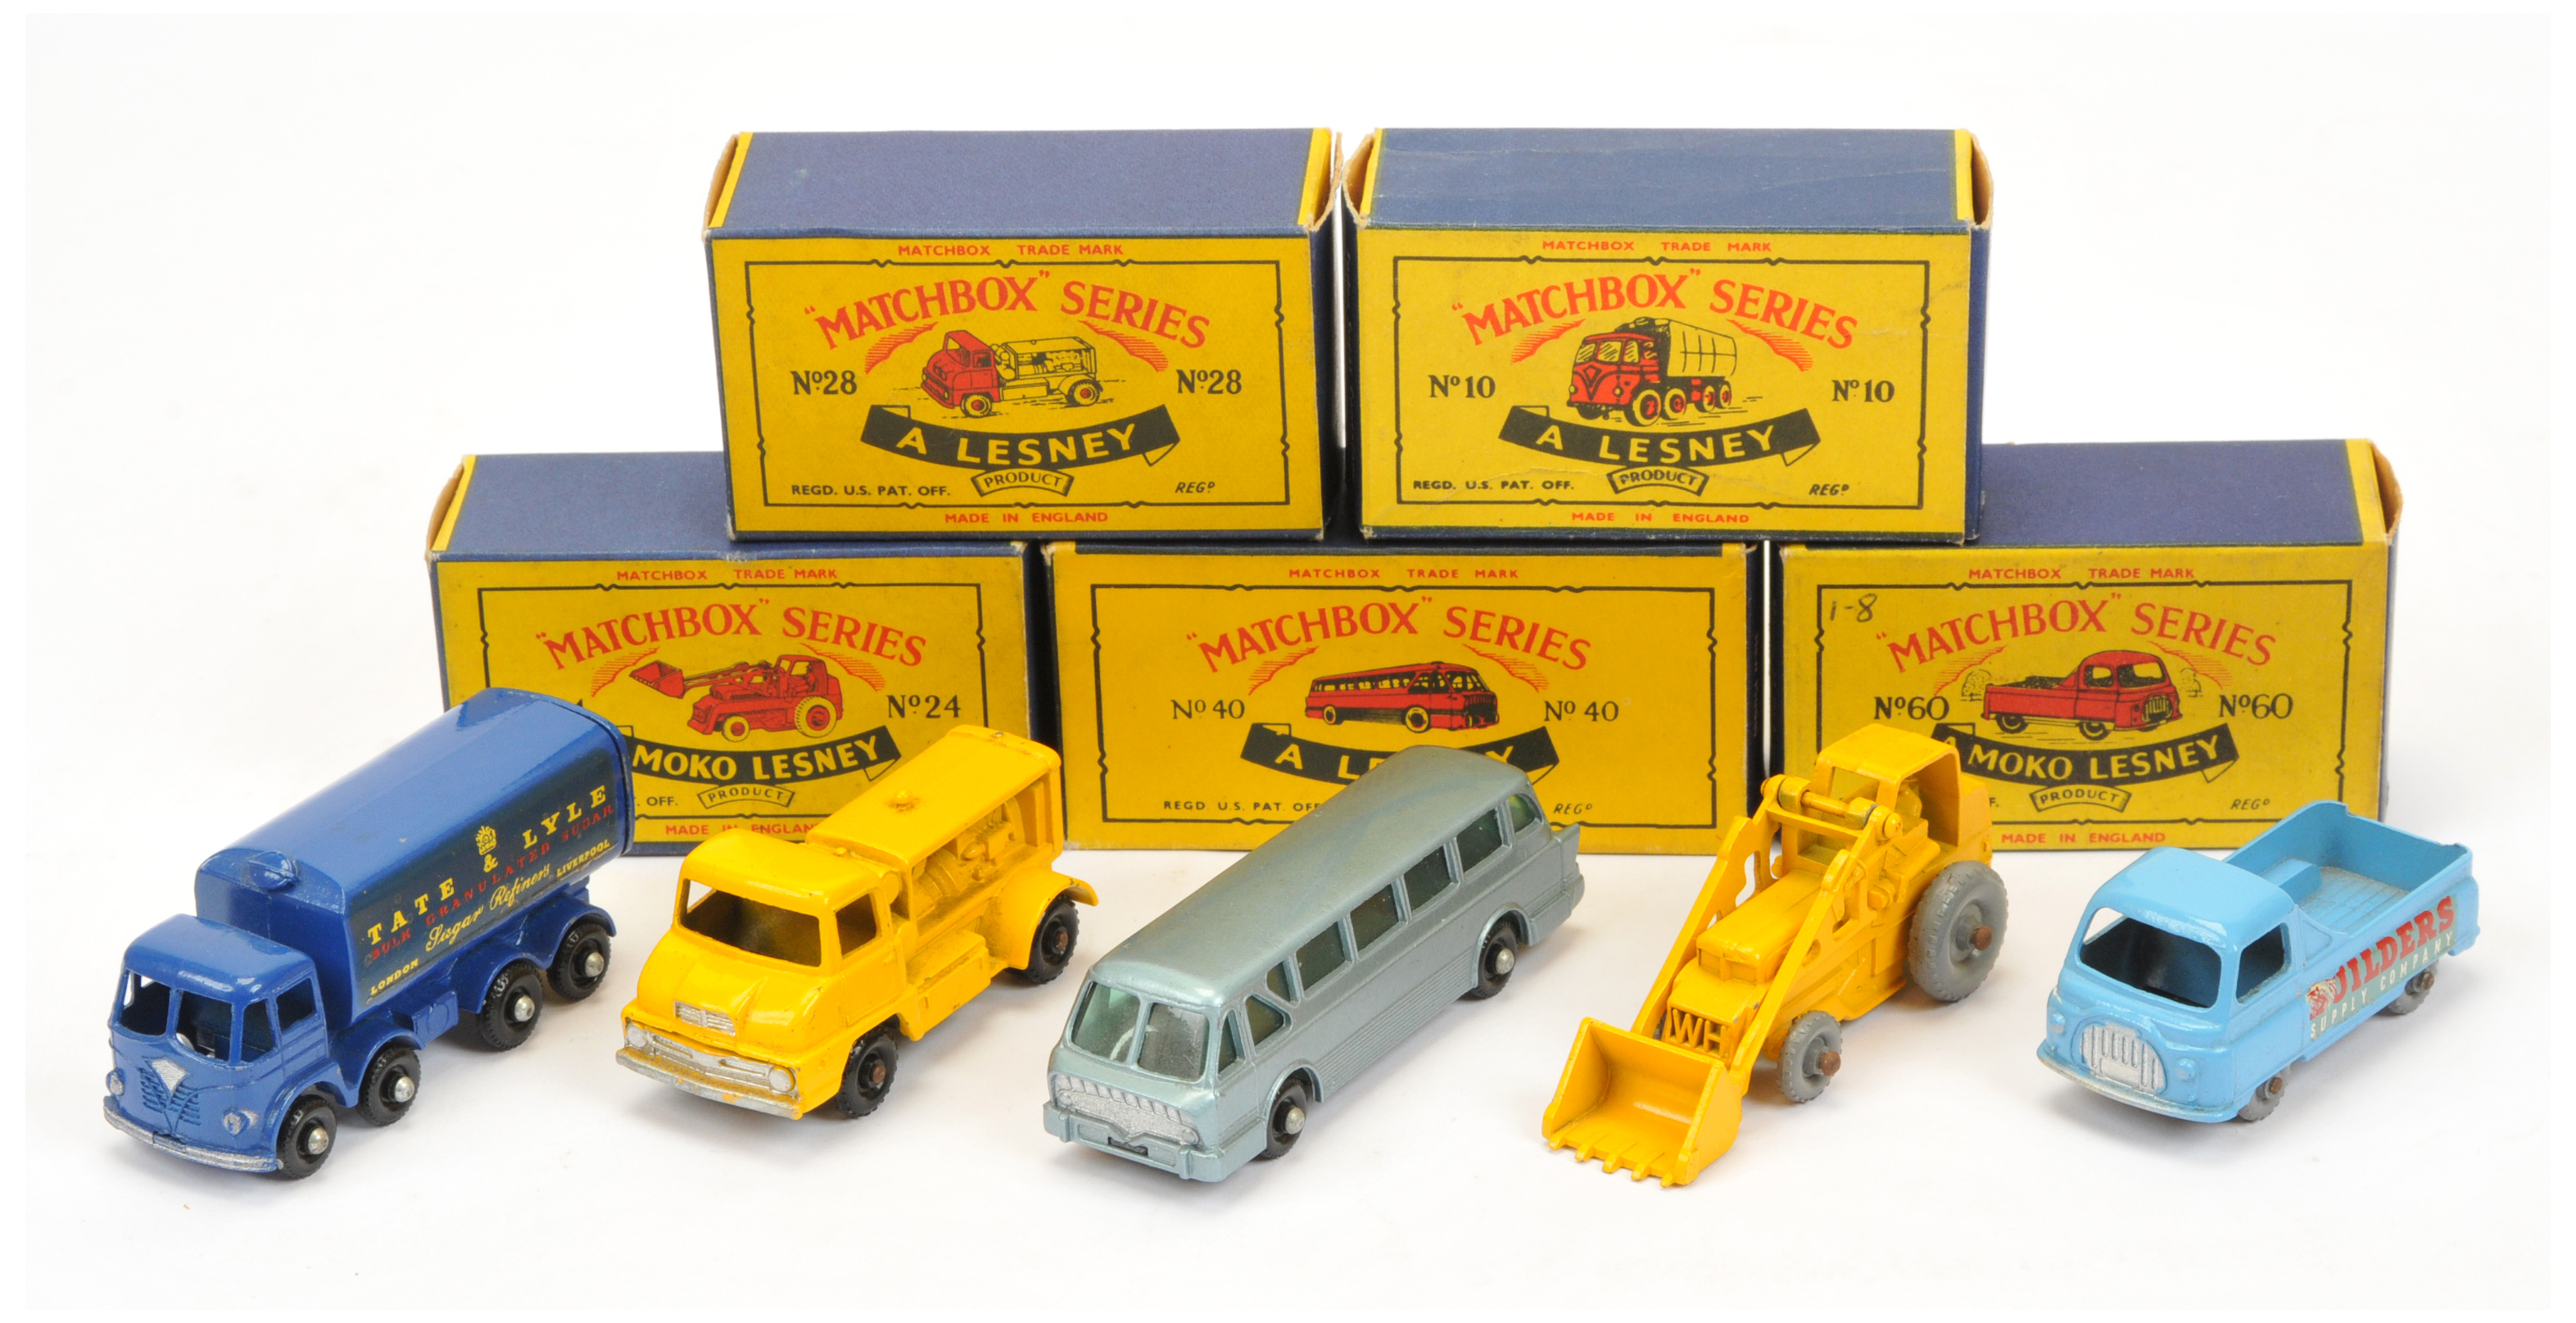 Matchbox Regular Wheels group (1) 10c Foden Sugar Container Truck - rear decal without crown, wit...